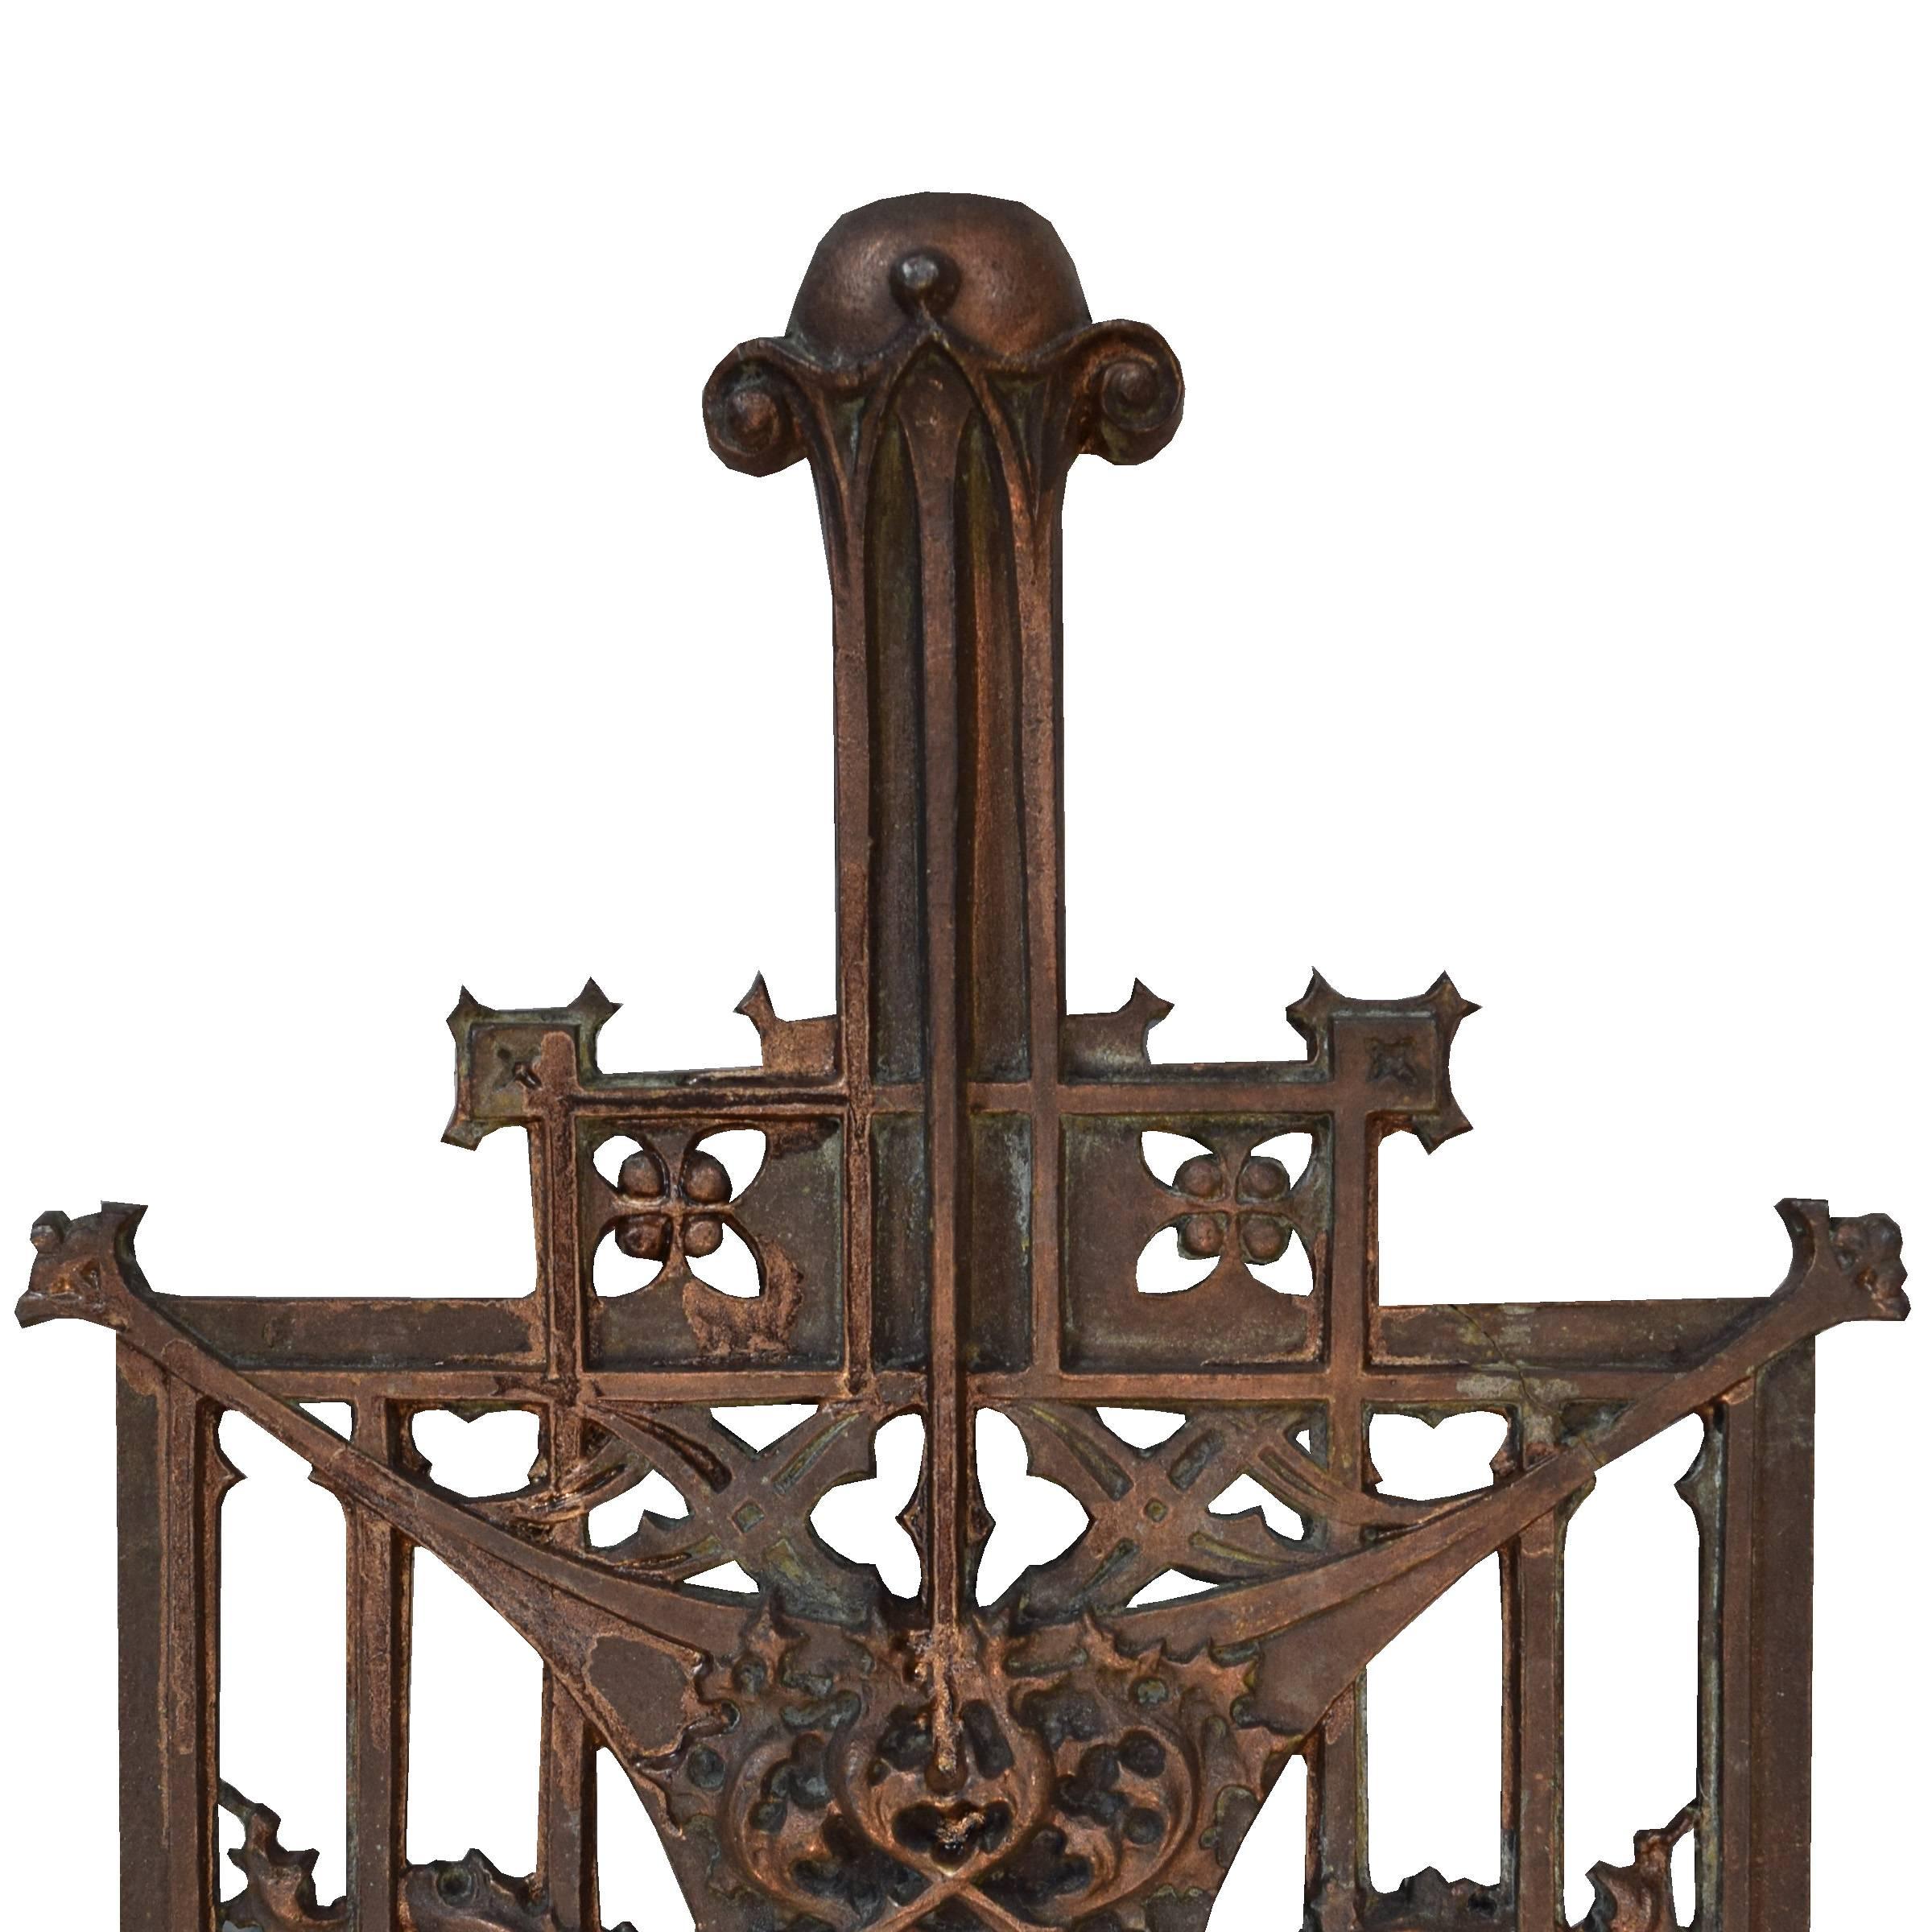 American Sullivan Designed Stair Baluster from Schlesinger and Mayer Department Store